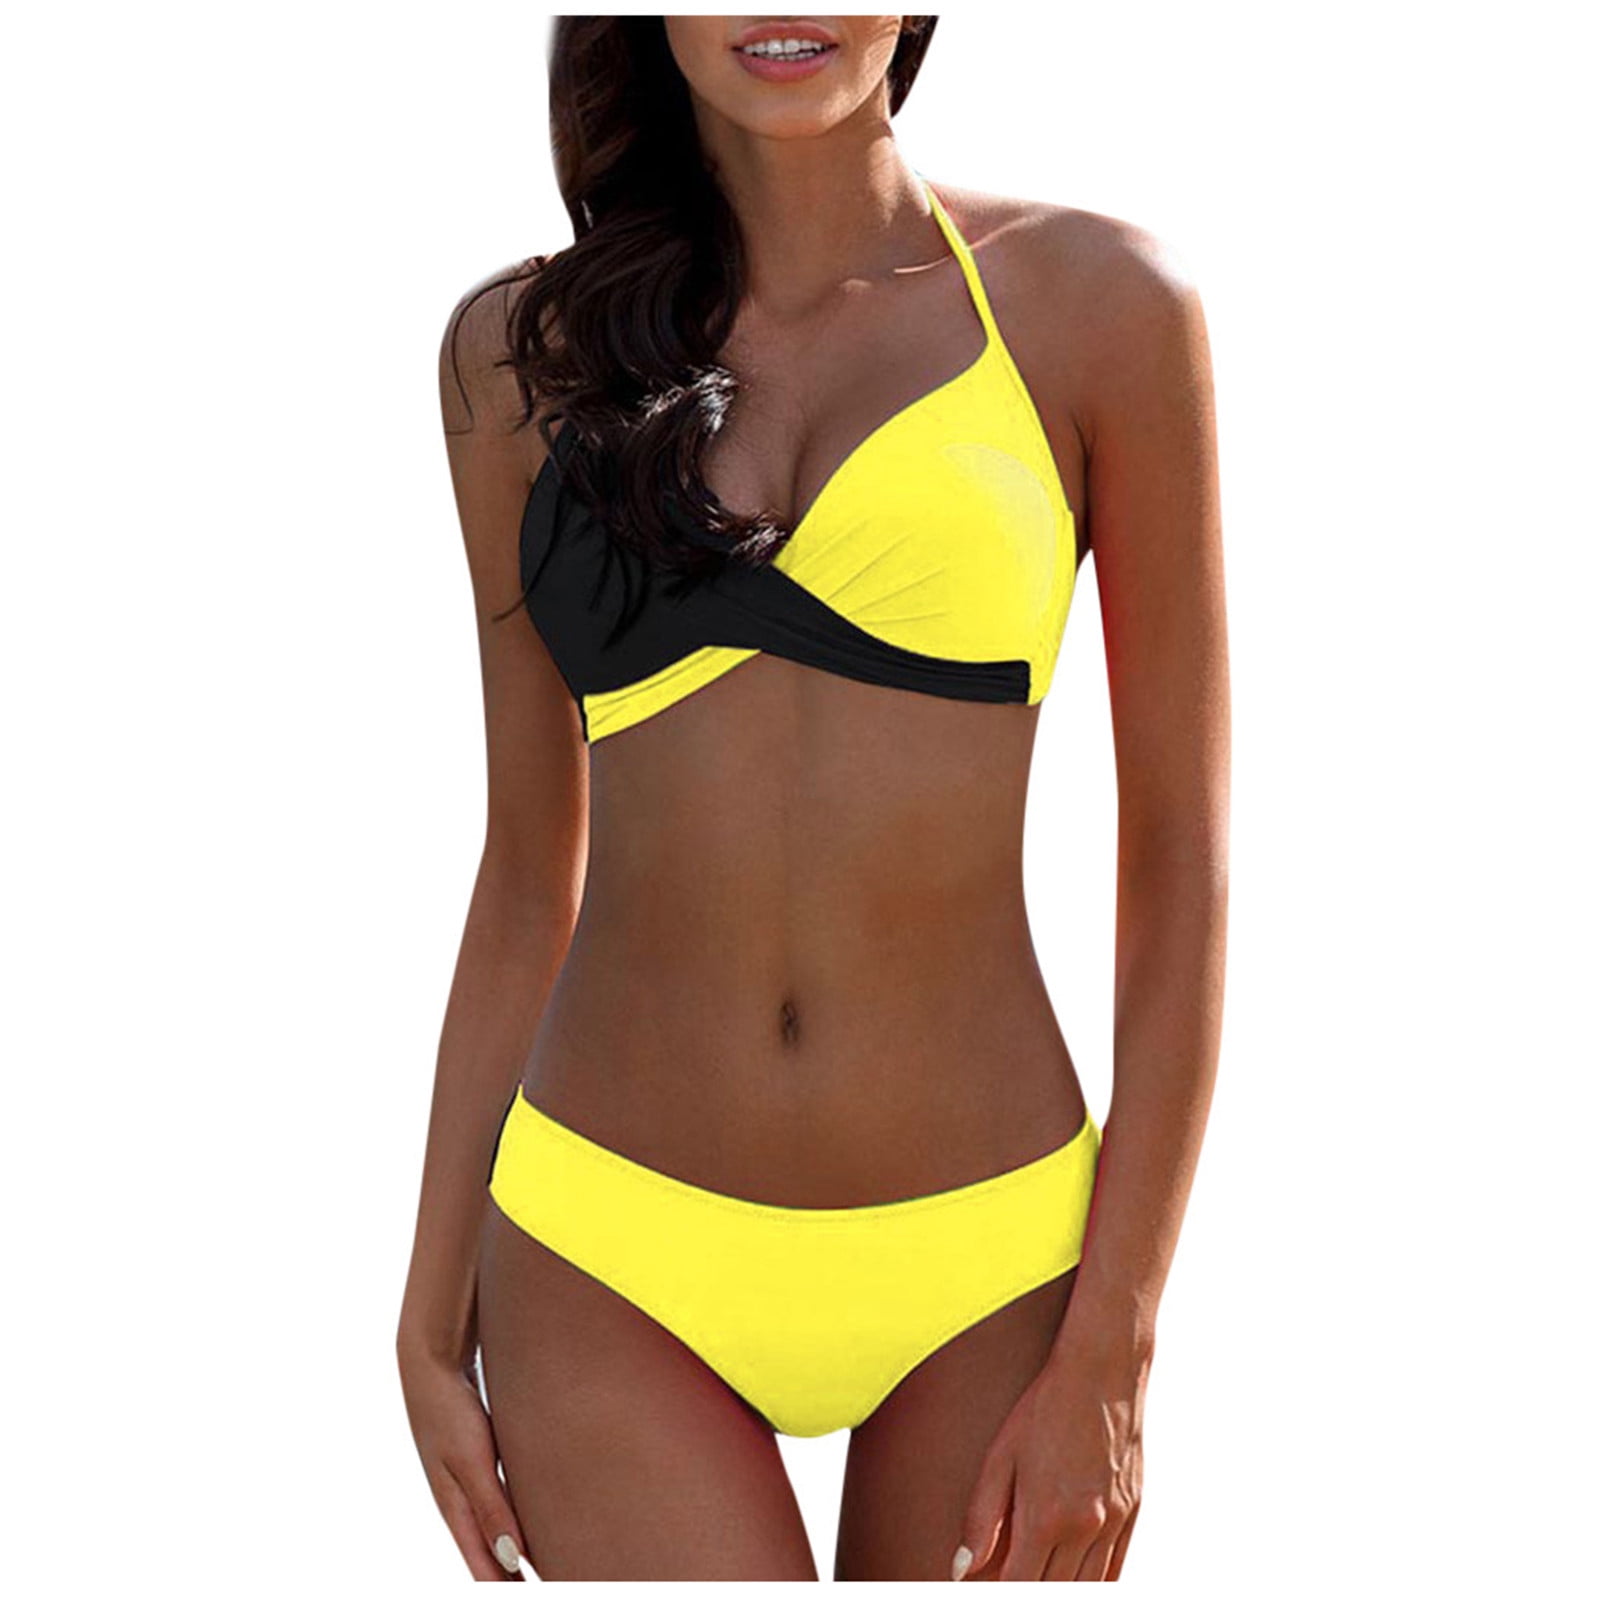 Up to 60% Off! Womens Swimsuits, Women Push Up Two Piece Bikini Swimsuits  Padded Swimwear Bathing Suit Outlet Deals Overstock Clearance